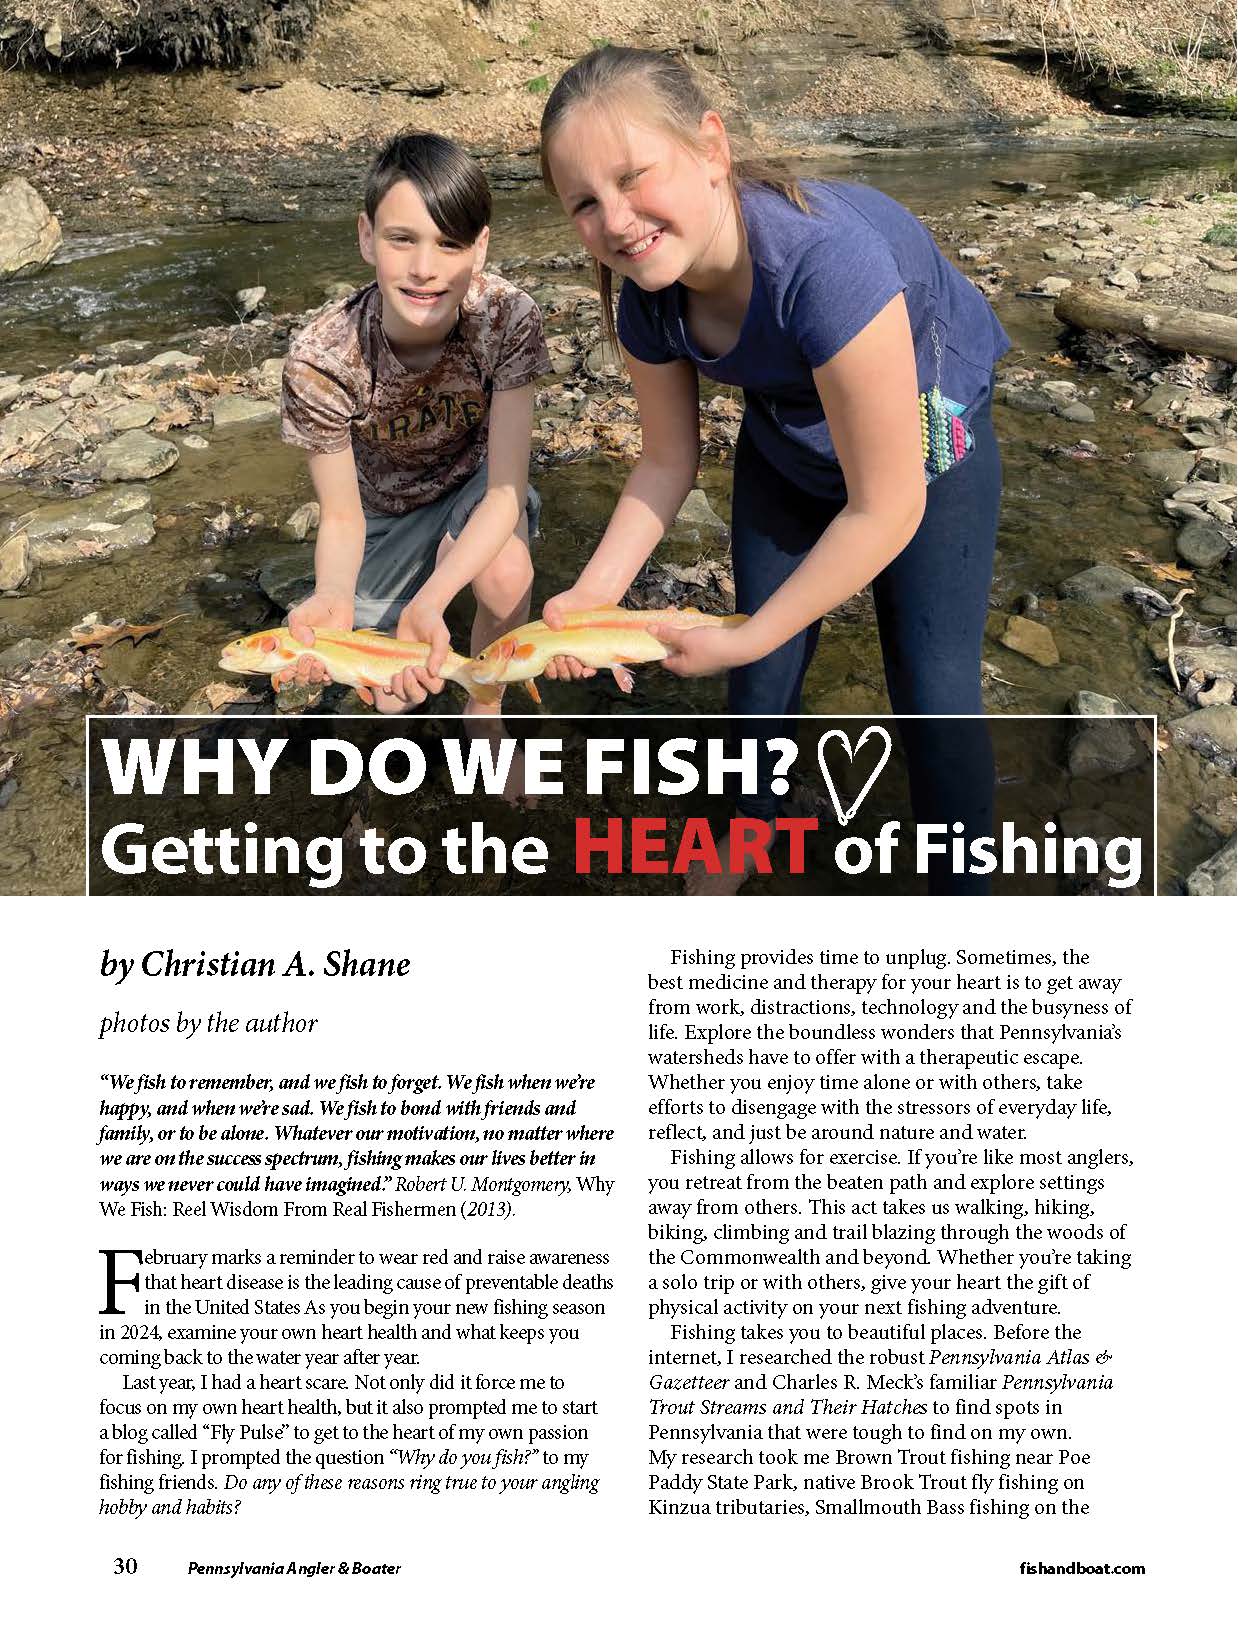 Cover page of Angler and Boater article discussing Rose Anna Moore's organization called This is my Quest